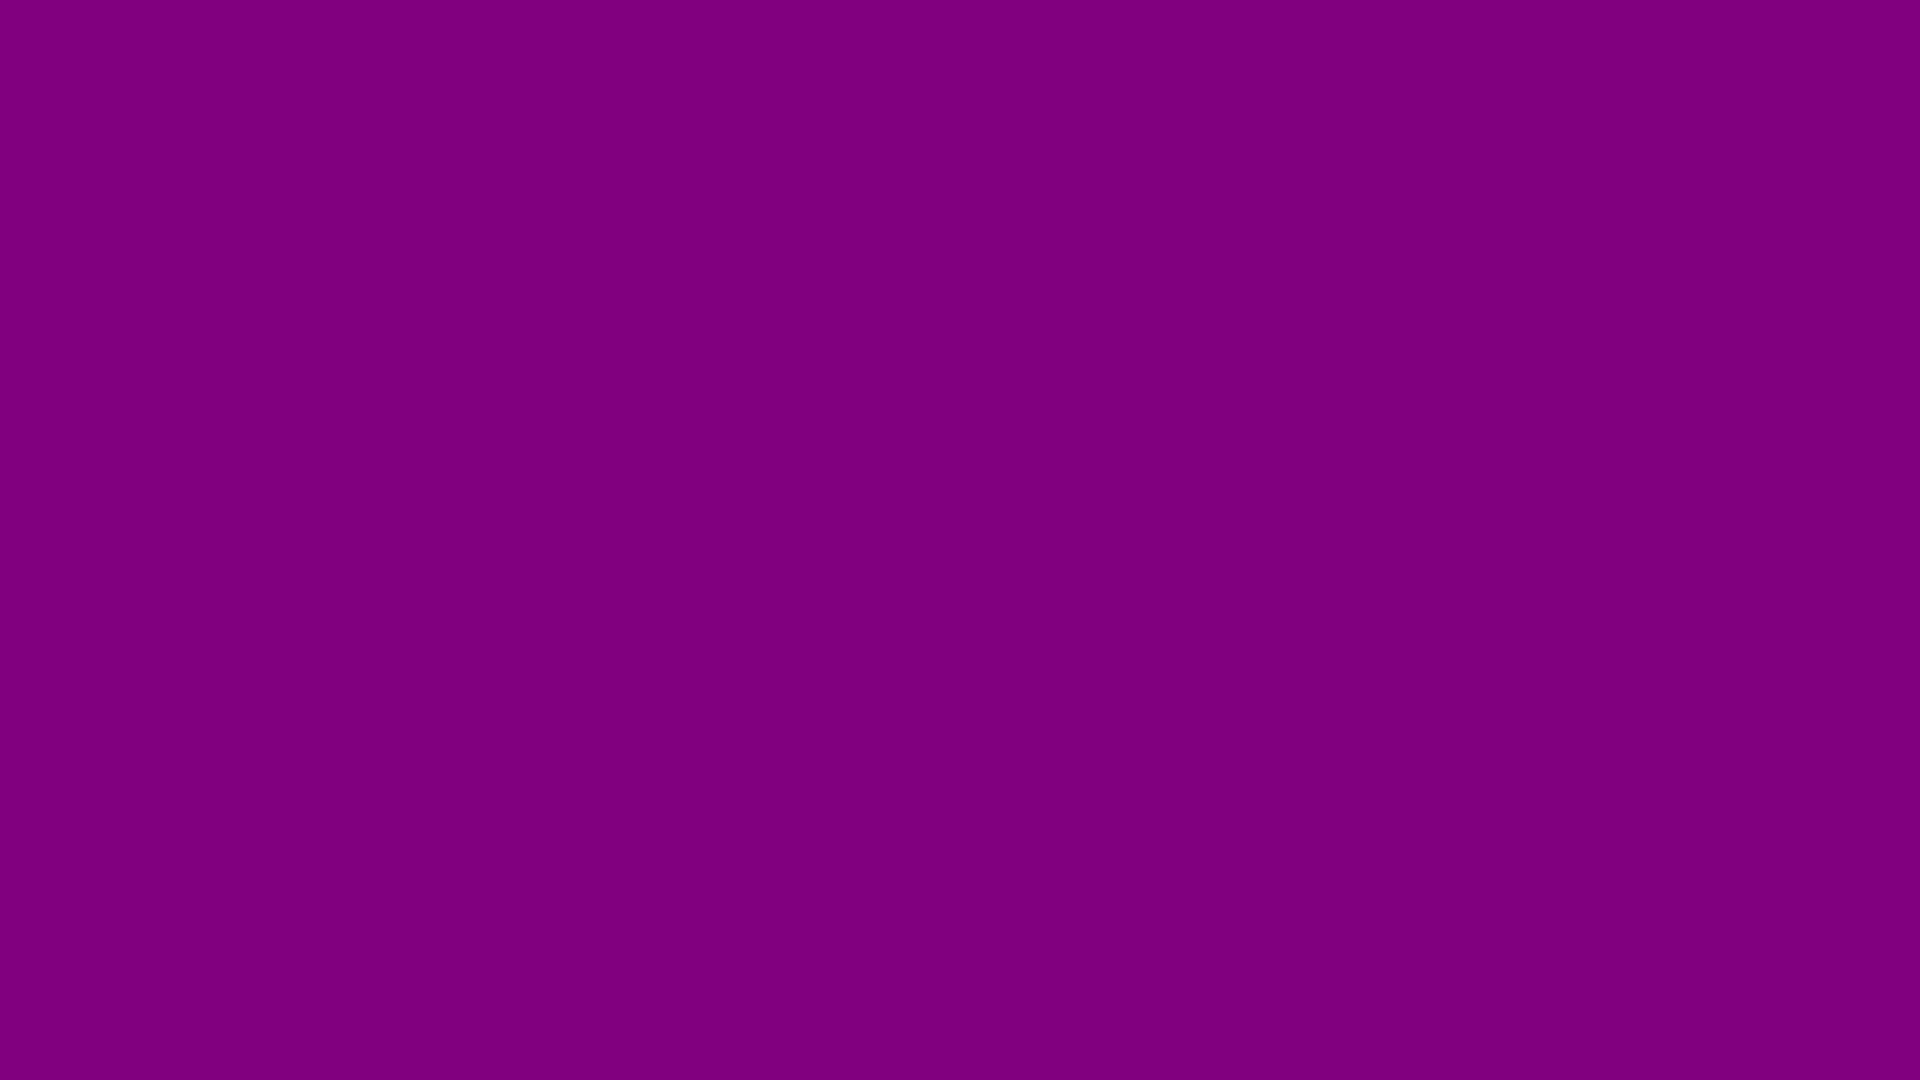 Bold, Bright, and Eye-Catching Solid Purple Wallpaper